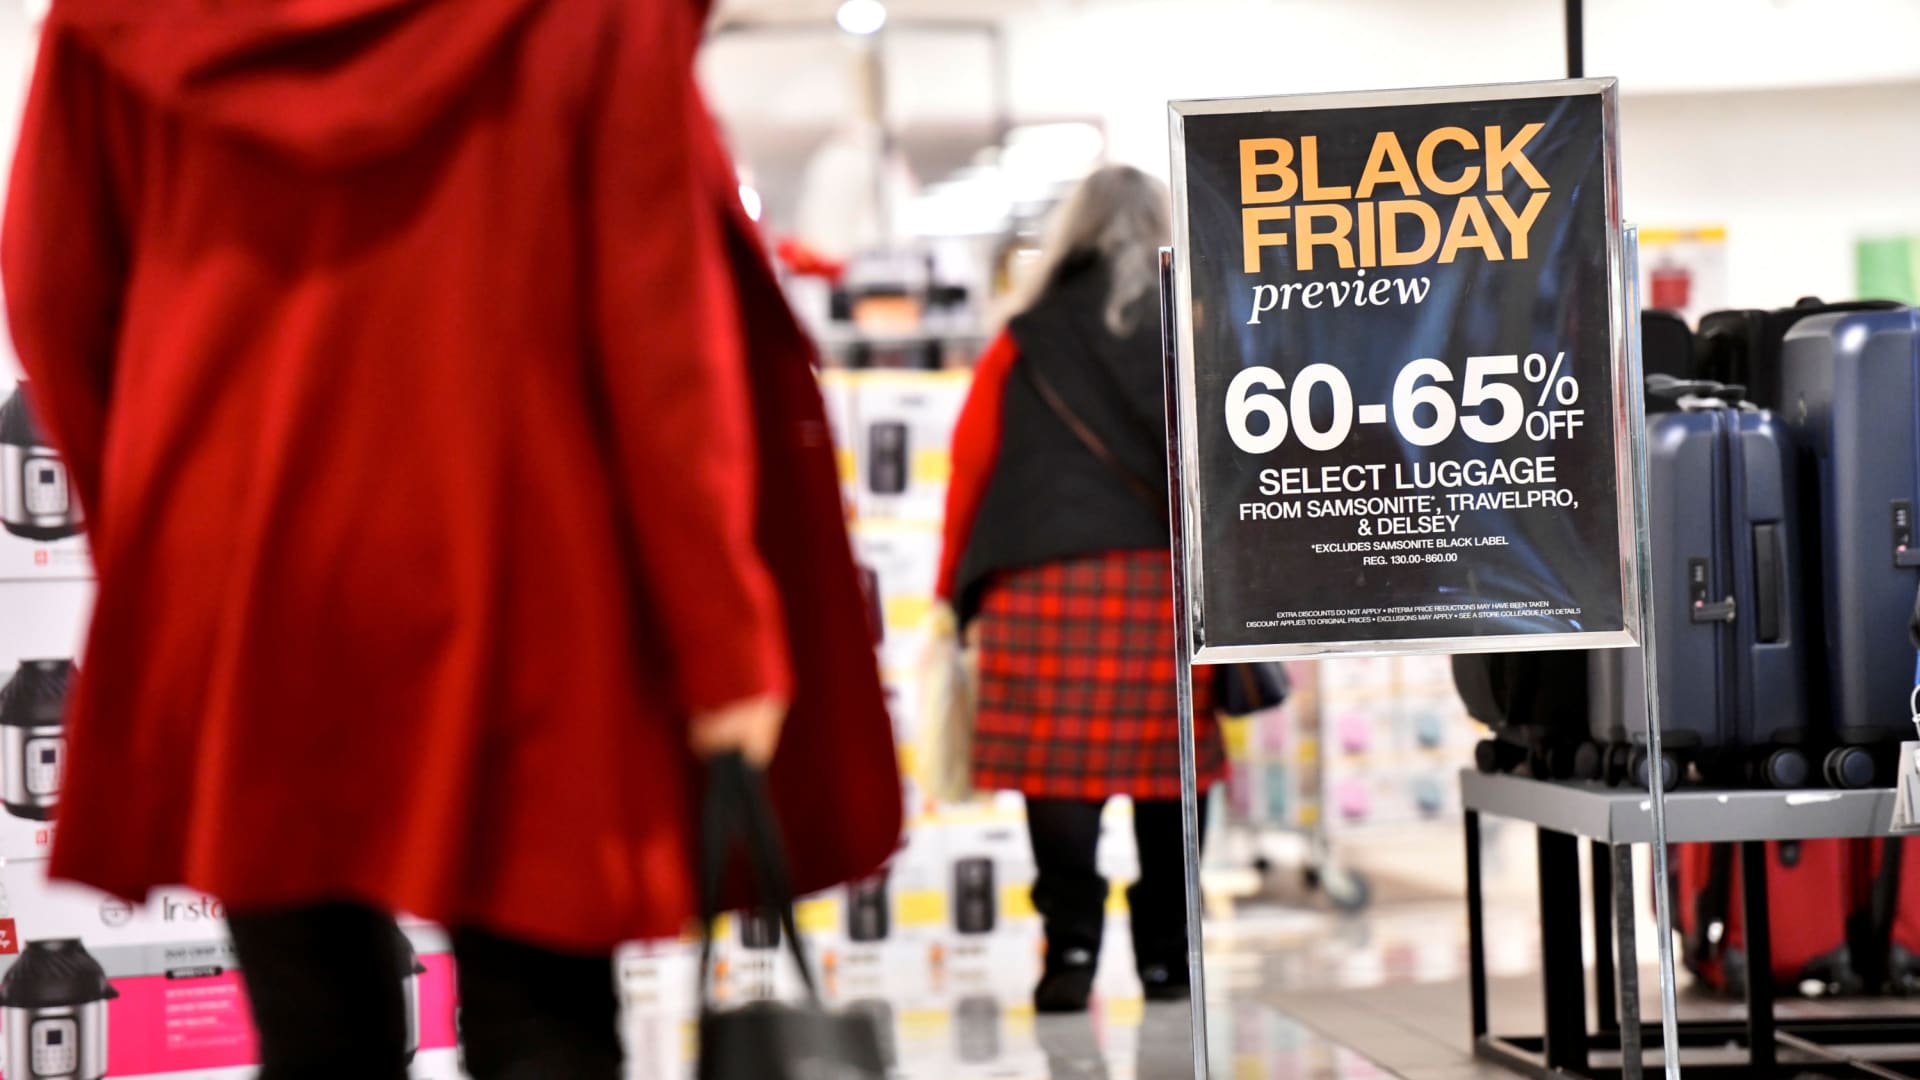 As holidays approach, CDC puts shopping at crowded stores on Black Friday in high-risk category